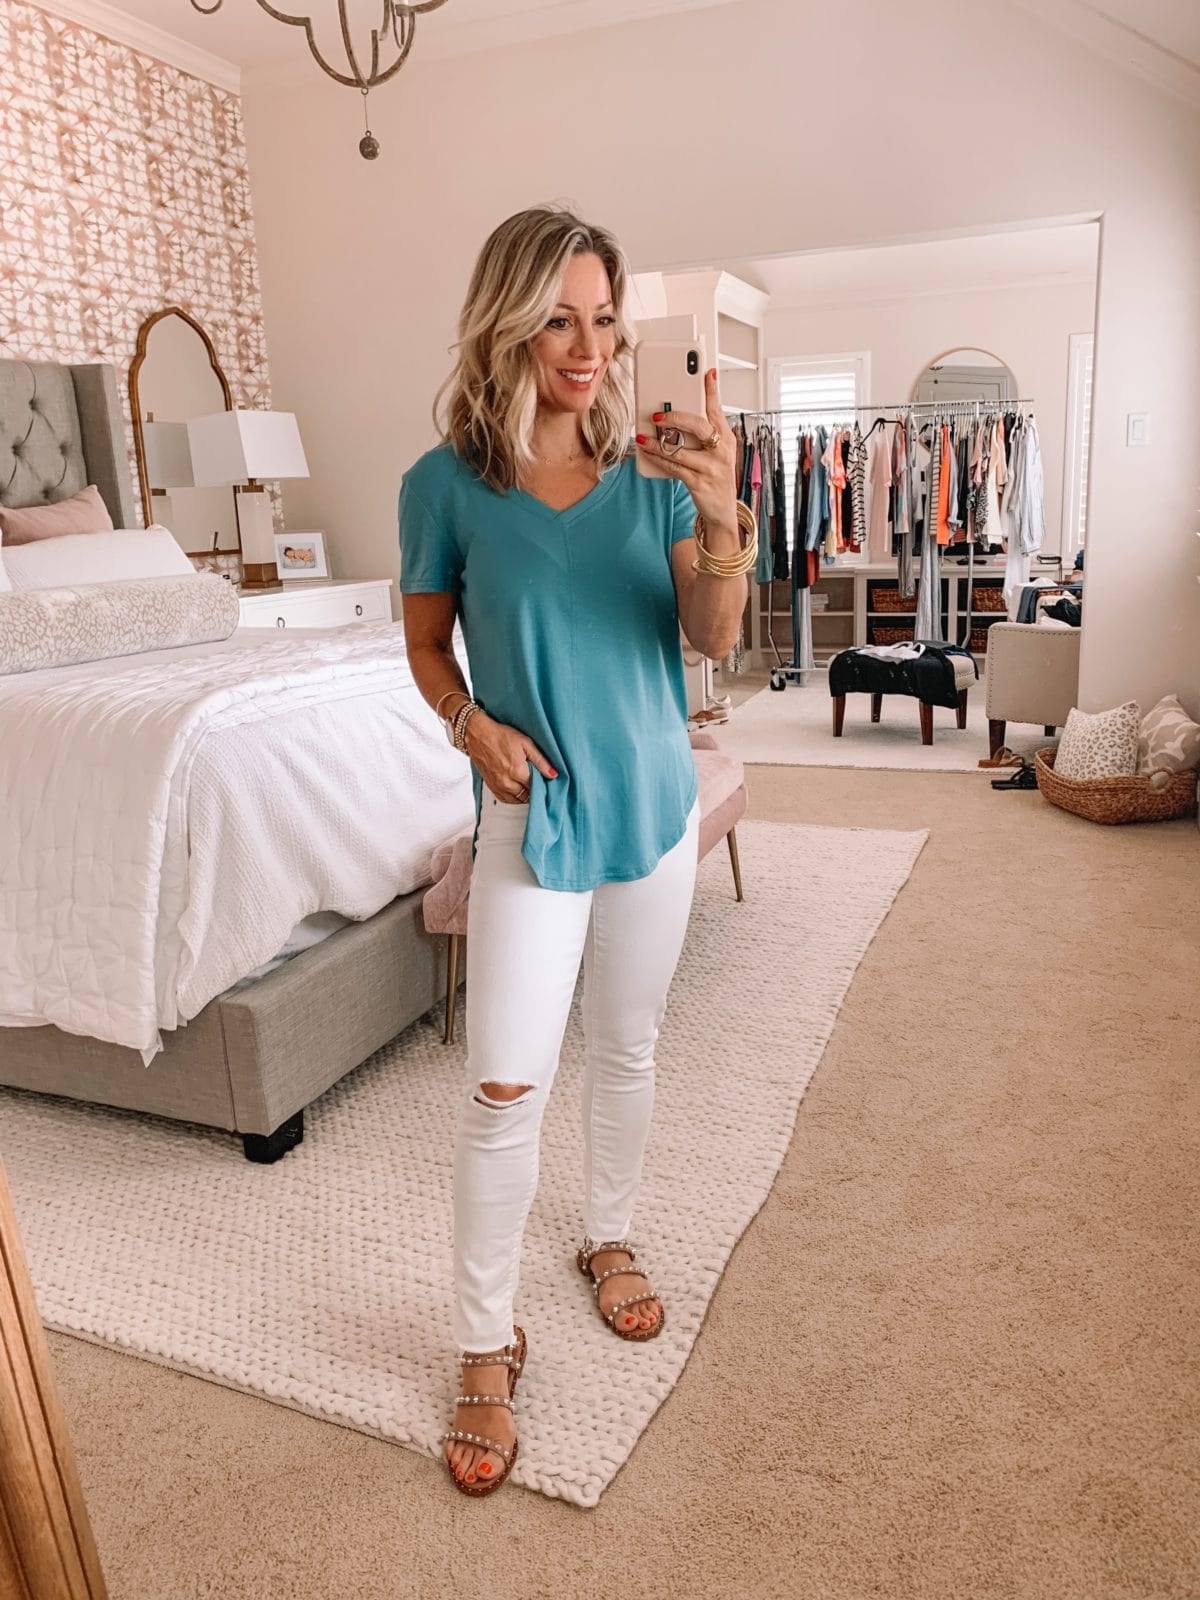 Amazon Fashion Finds, V-Neck Tunic Top, White Jeans, Studded Sandals 